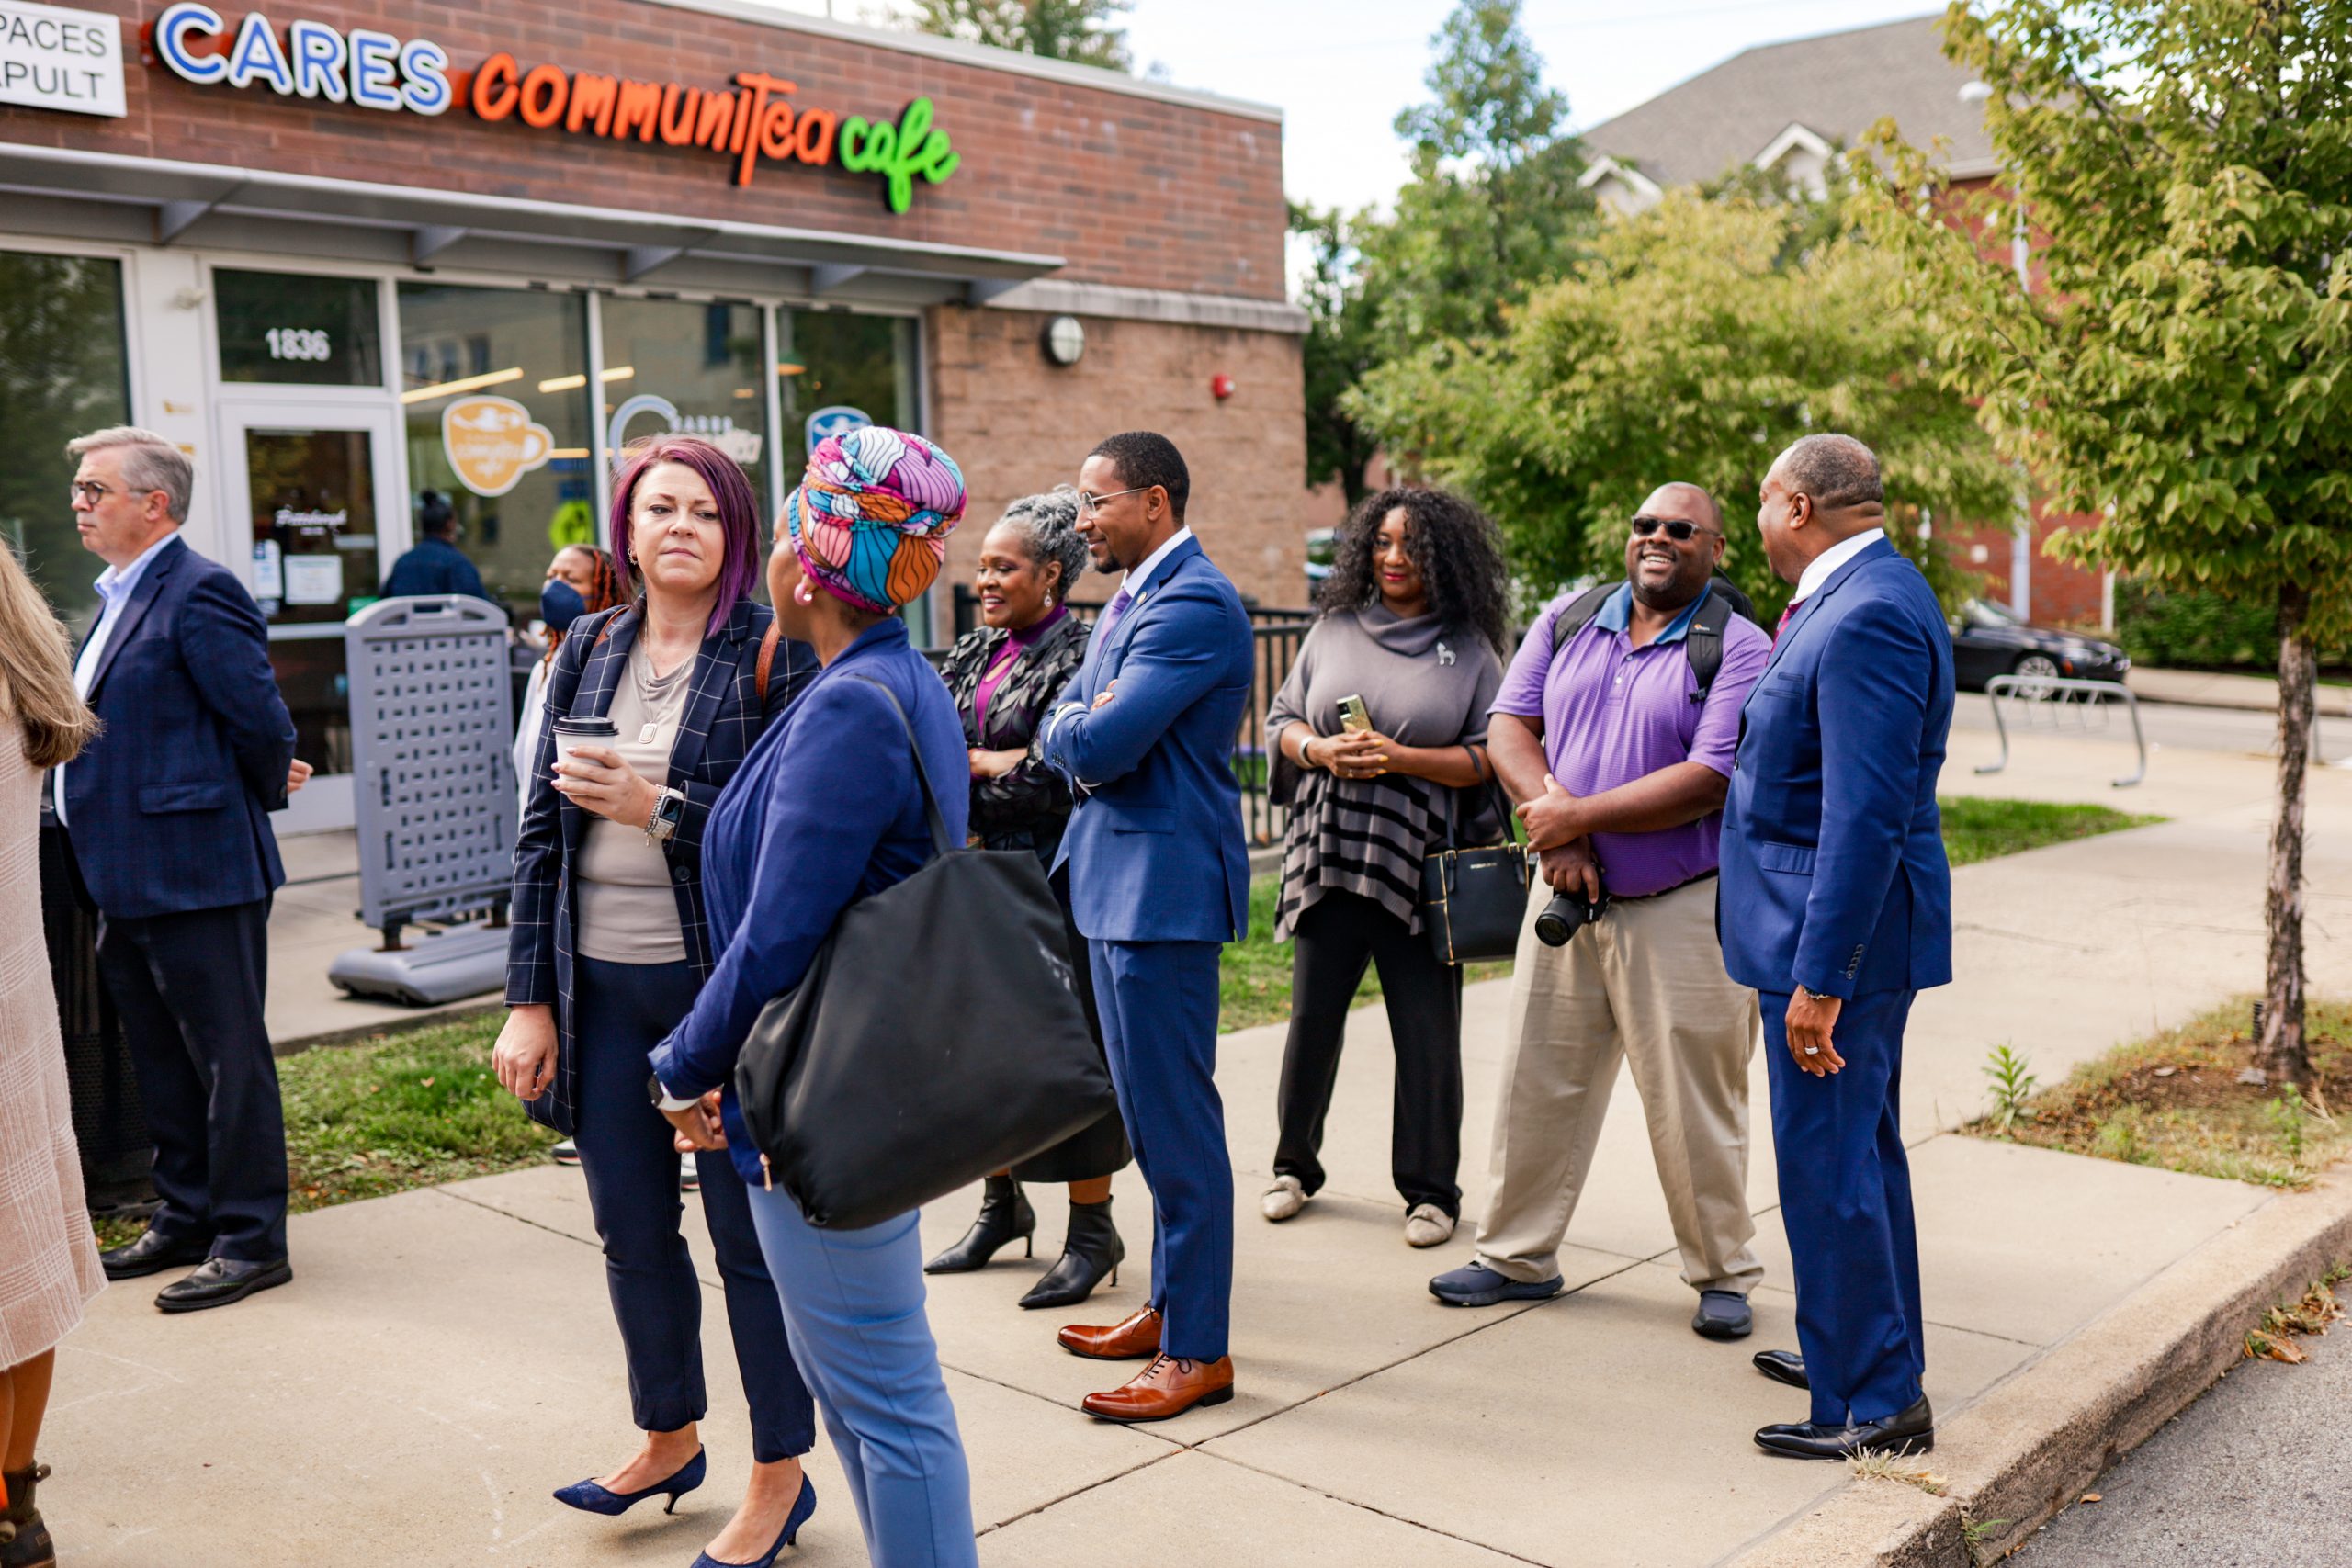 A crowd of people stand along a sidewalk at one of our press events. Behind them, you can see the entrance to the CARES Communitea Cafe in the Hill District.